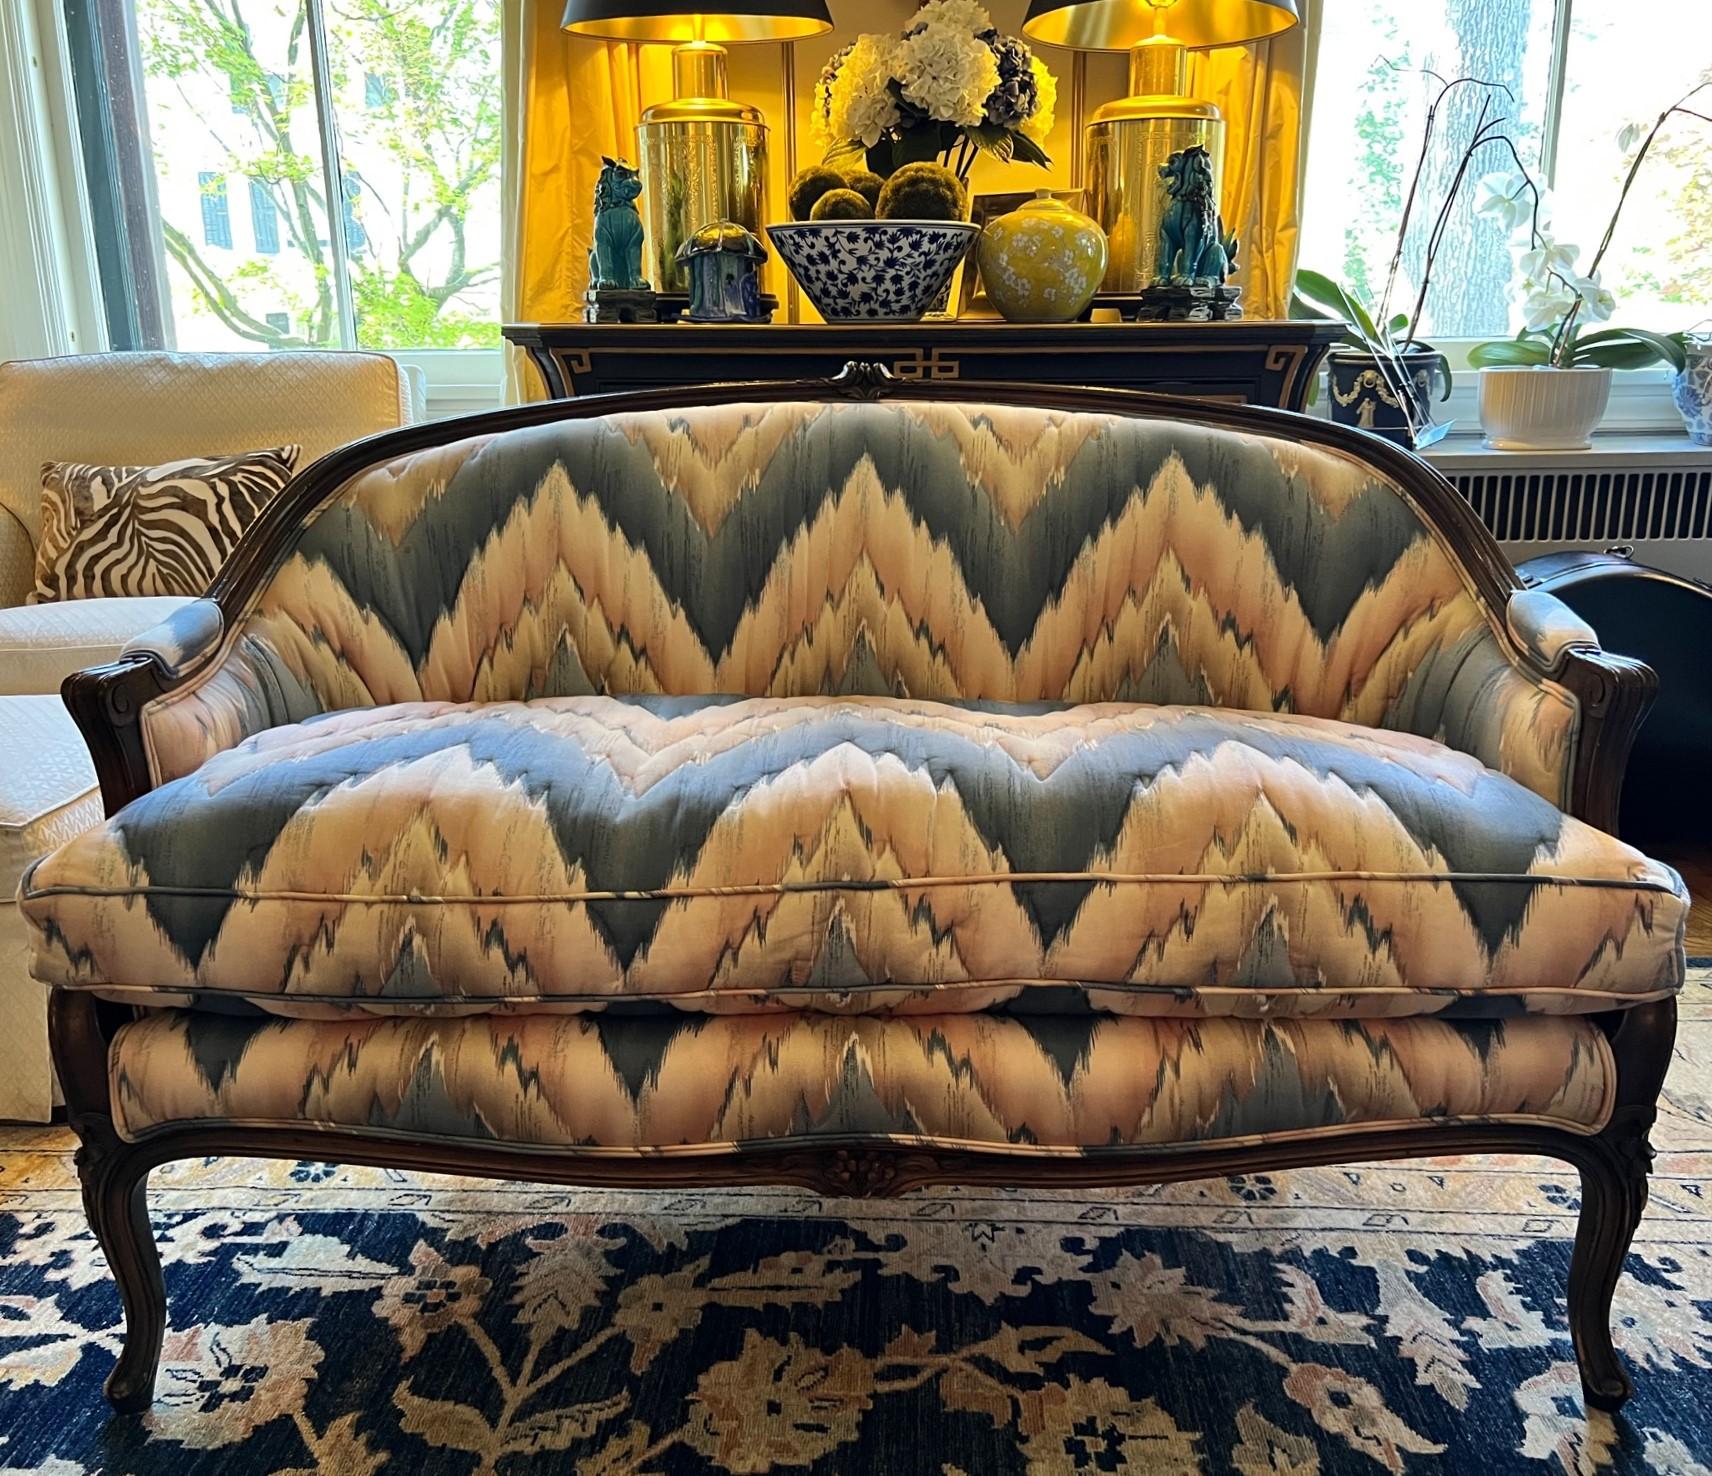 A vintage Louis XV style curved settee with carved wood details. The sofa was upholstered in 1970 in flamestitch cotton fabric in a blue and peach colorway. The fabric has been hand quilted following the contours of the flamestitch pattern. The seat